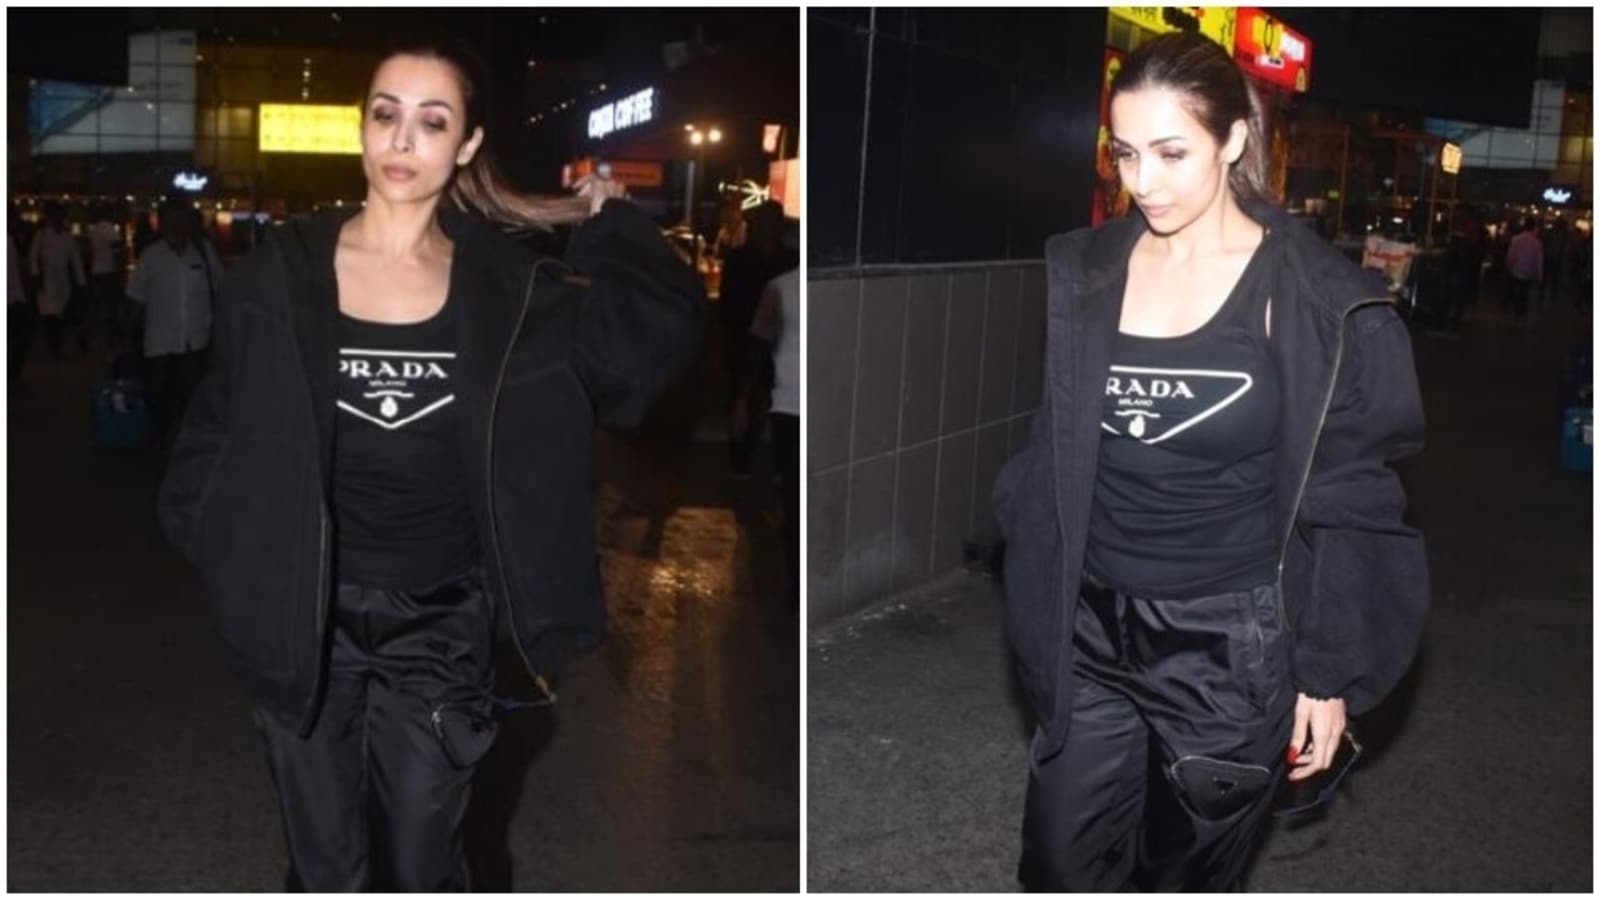 Malaika Arora channels fierce vibes in all-black tank top, pants and oversized jacket to slay airport fashion. Watch